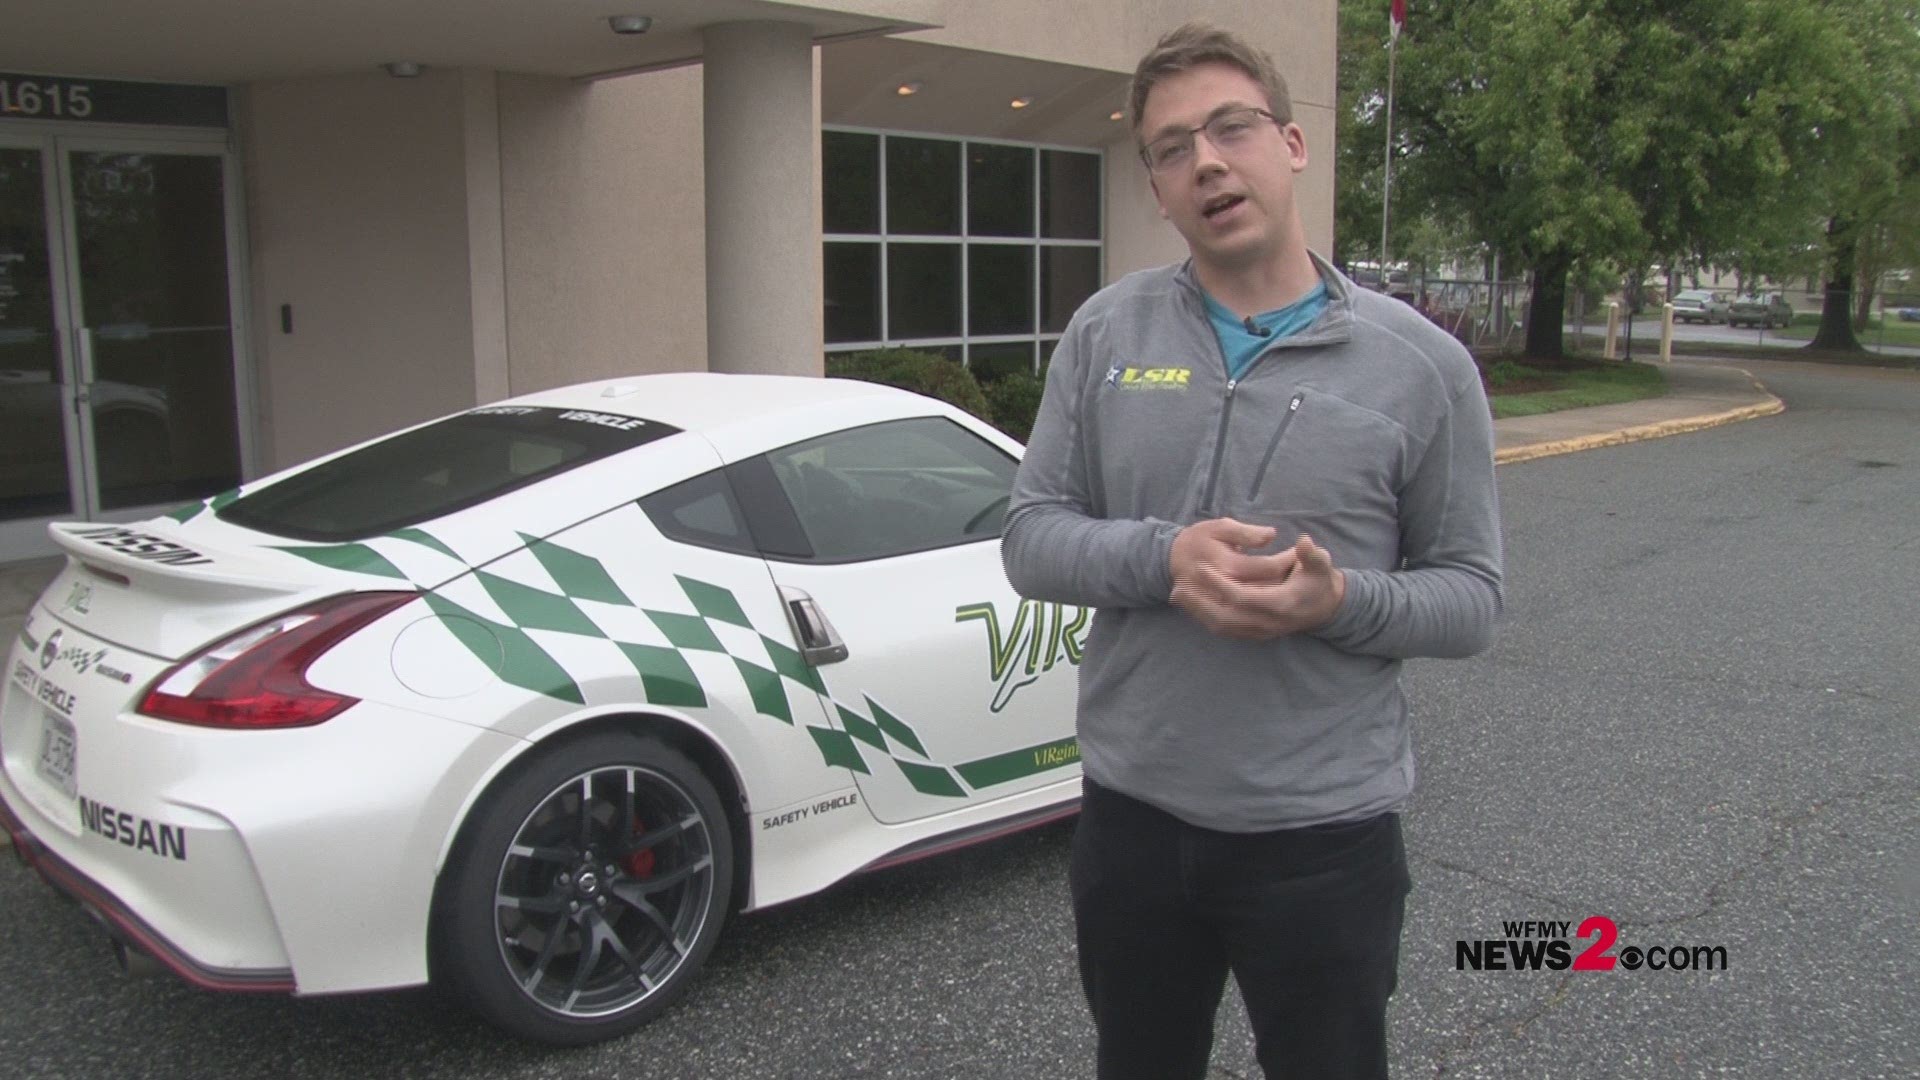 The Pirelli World Challenge returns to VIRginia International Raceway this week. Driver Scott Heckert stopped by WFMY News 2 Tuesday to talk about it.